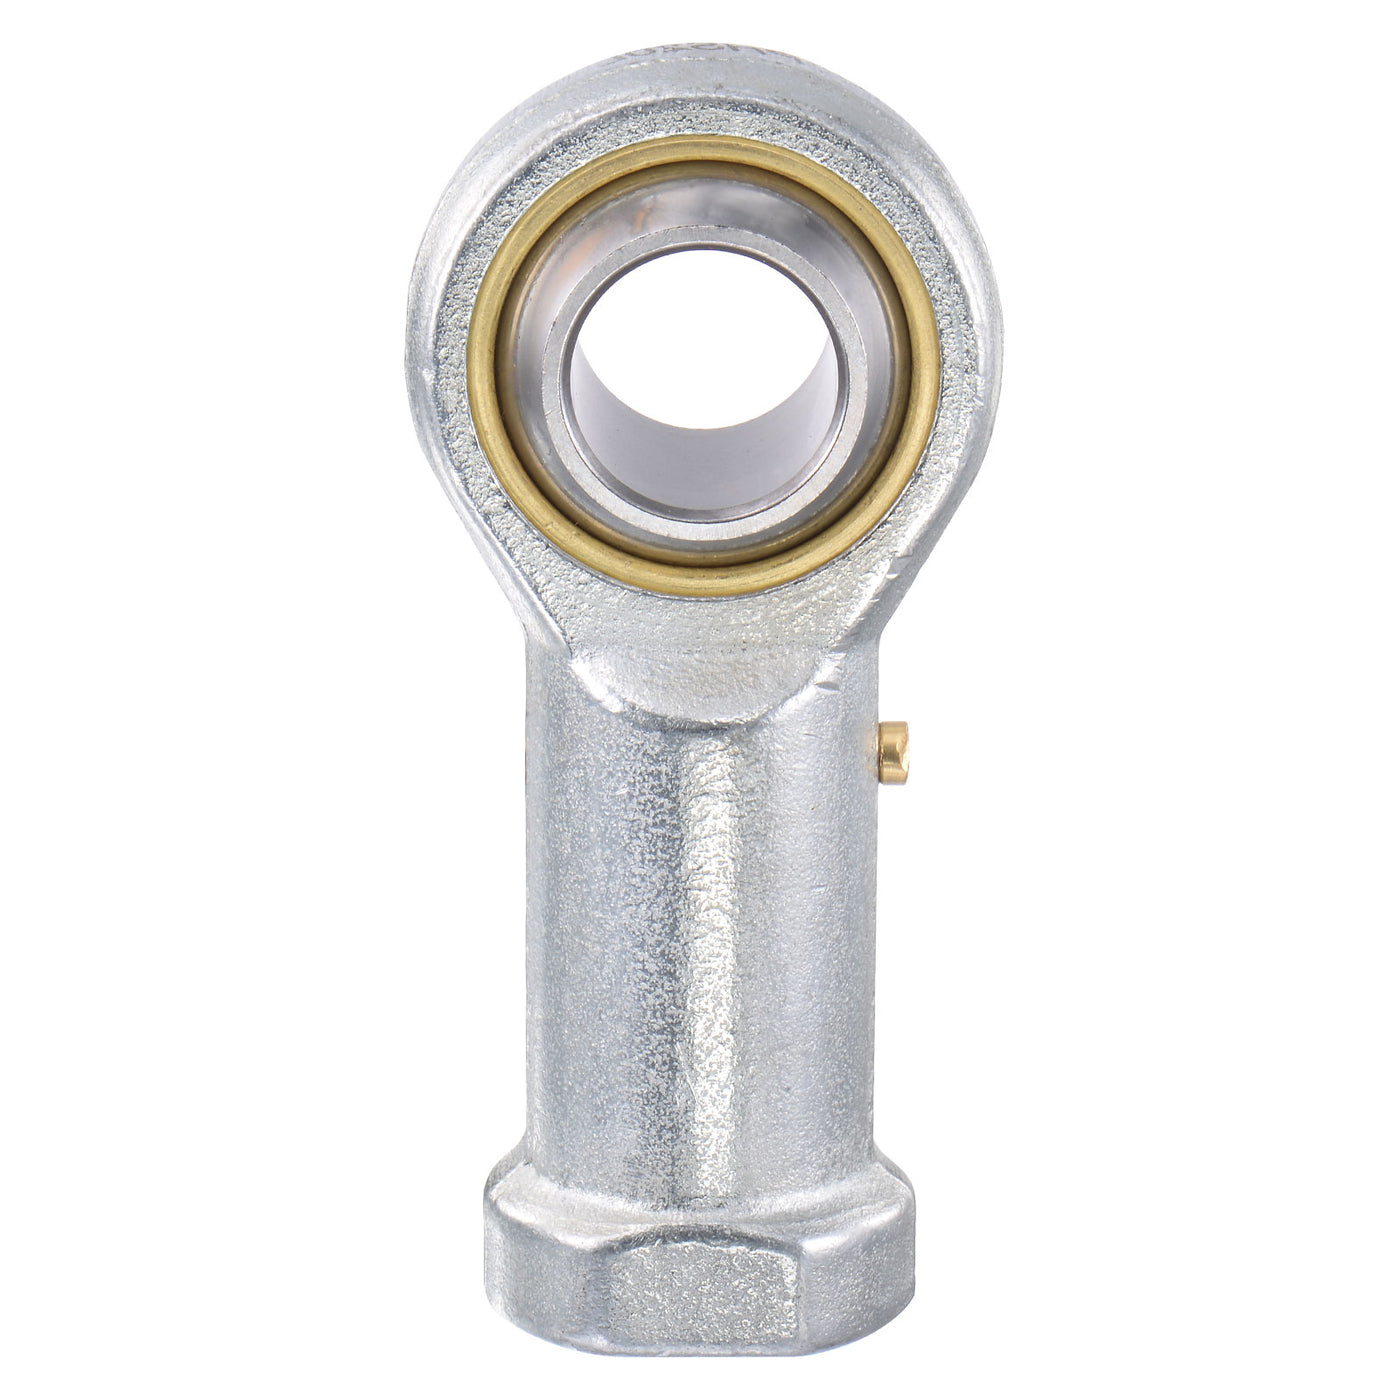 uxcell Uxcell PHS20 Rod End Bearing 20mm Bore Self-lubricated M20x1.5 Left Hand Female Thread